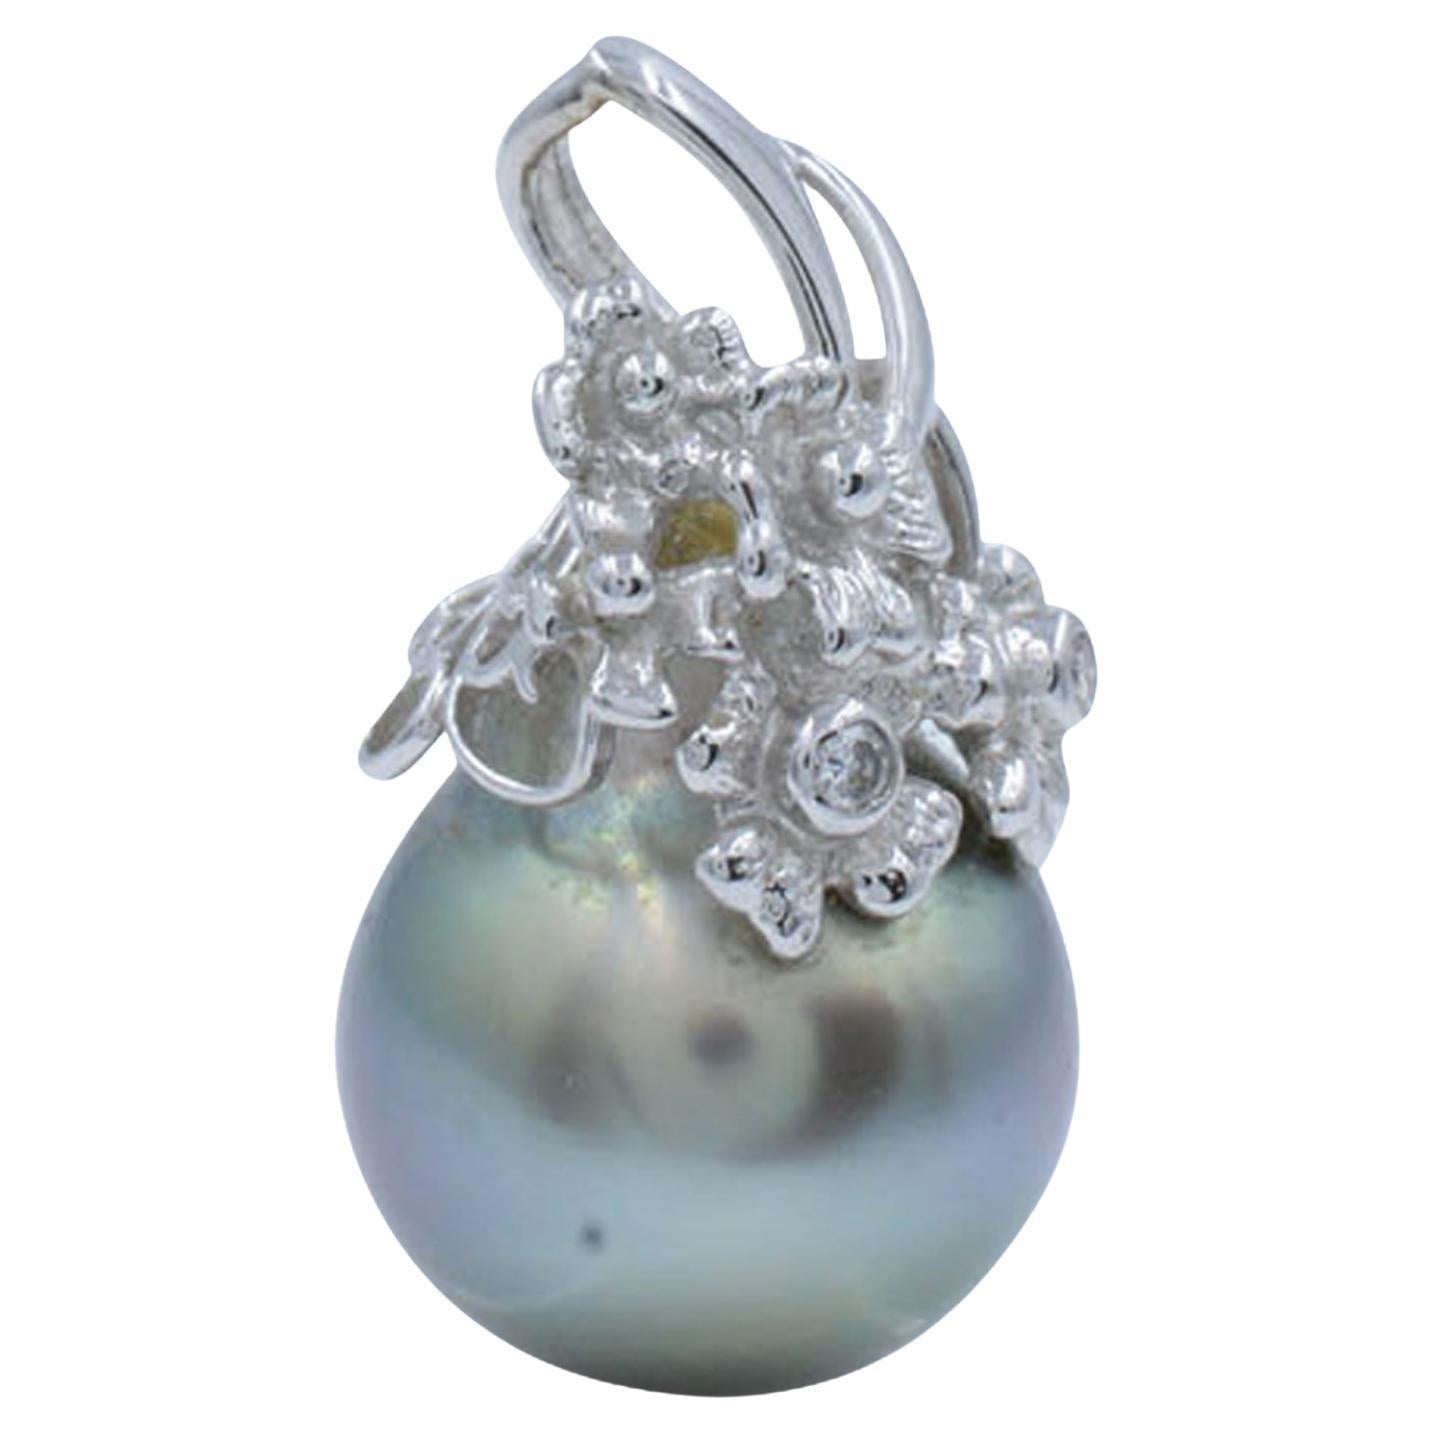 This beautiful pendant is crafted in 14K white gold and encrusted with a black Tahitian pearl and placed in a white gold bail. The bail is set with round cut diamonds just for a touch of sparkle weighing 0.03ct. Pearl measures about 12mm and has a